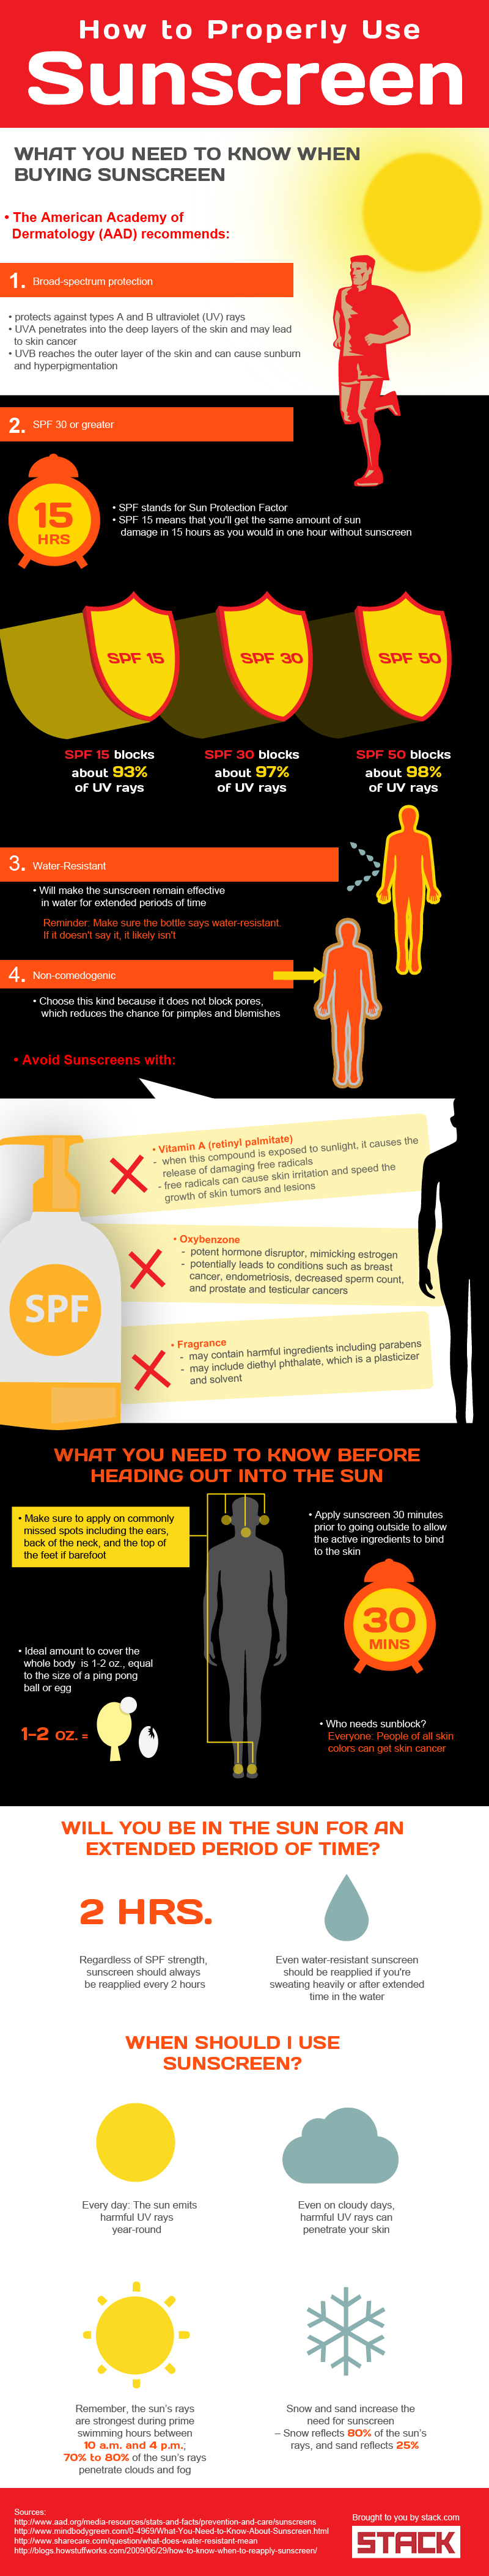 InfoGraphic on How to Properly use Sunscreen,